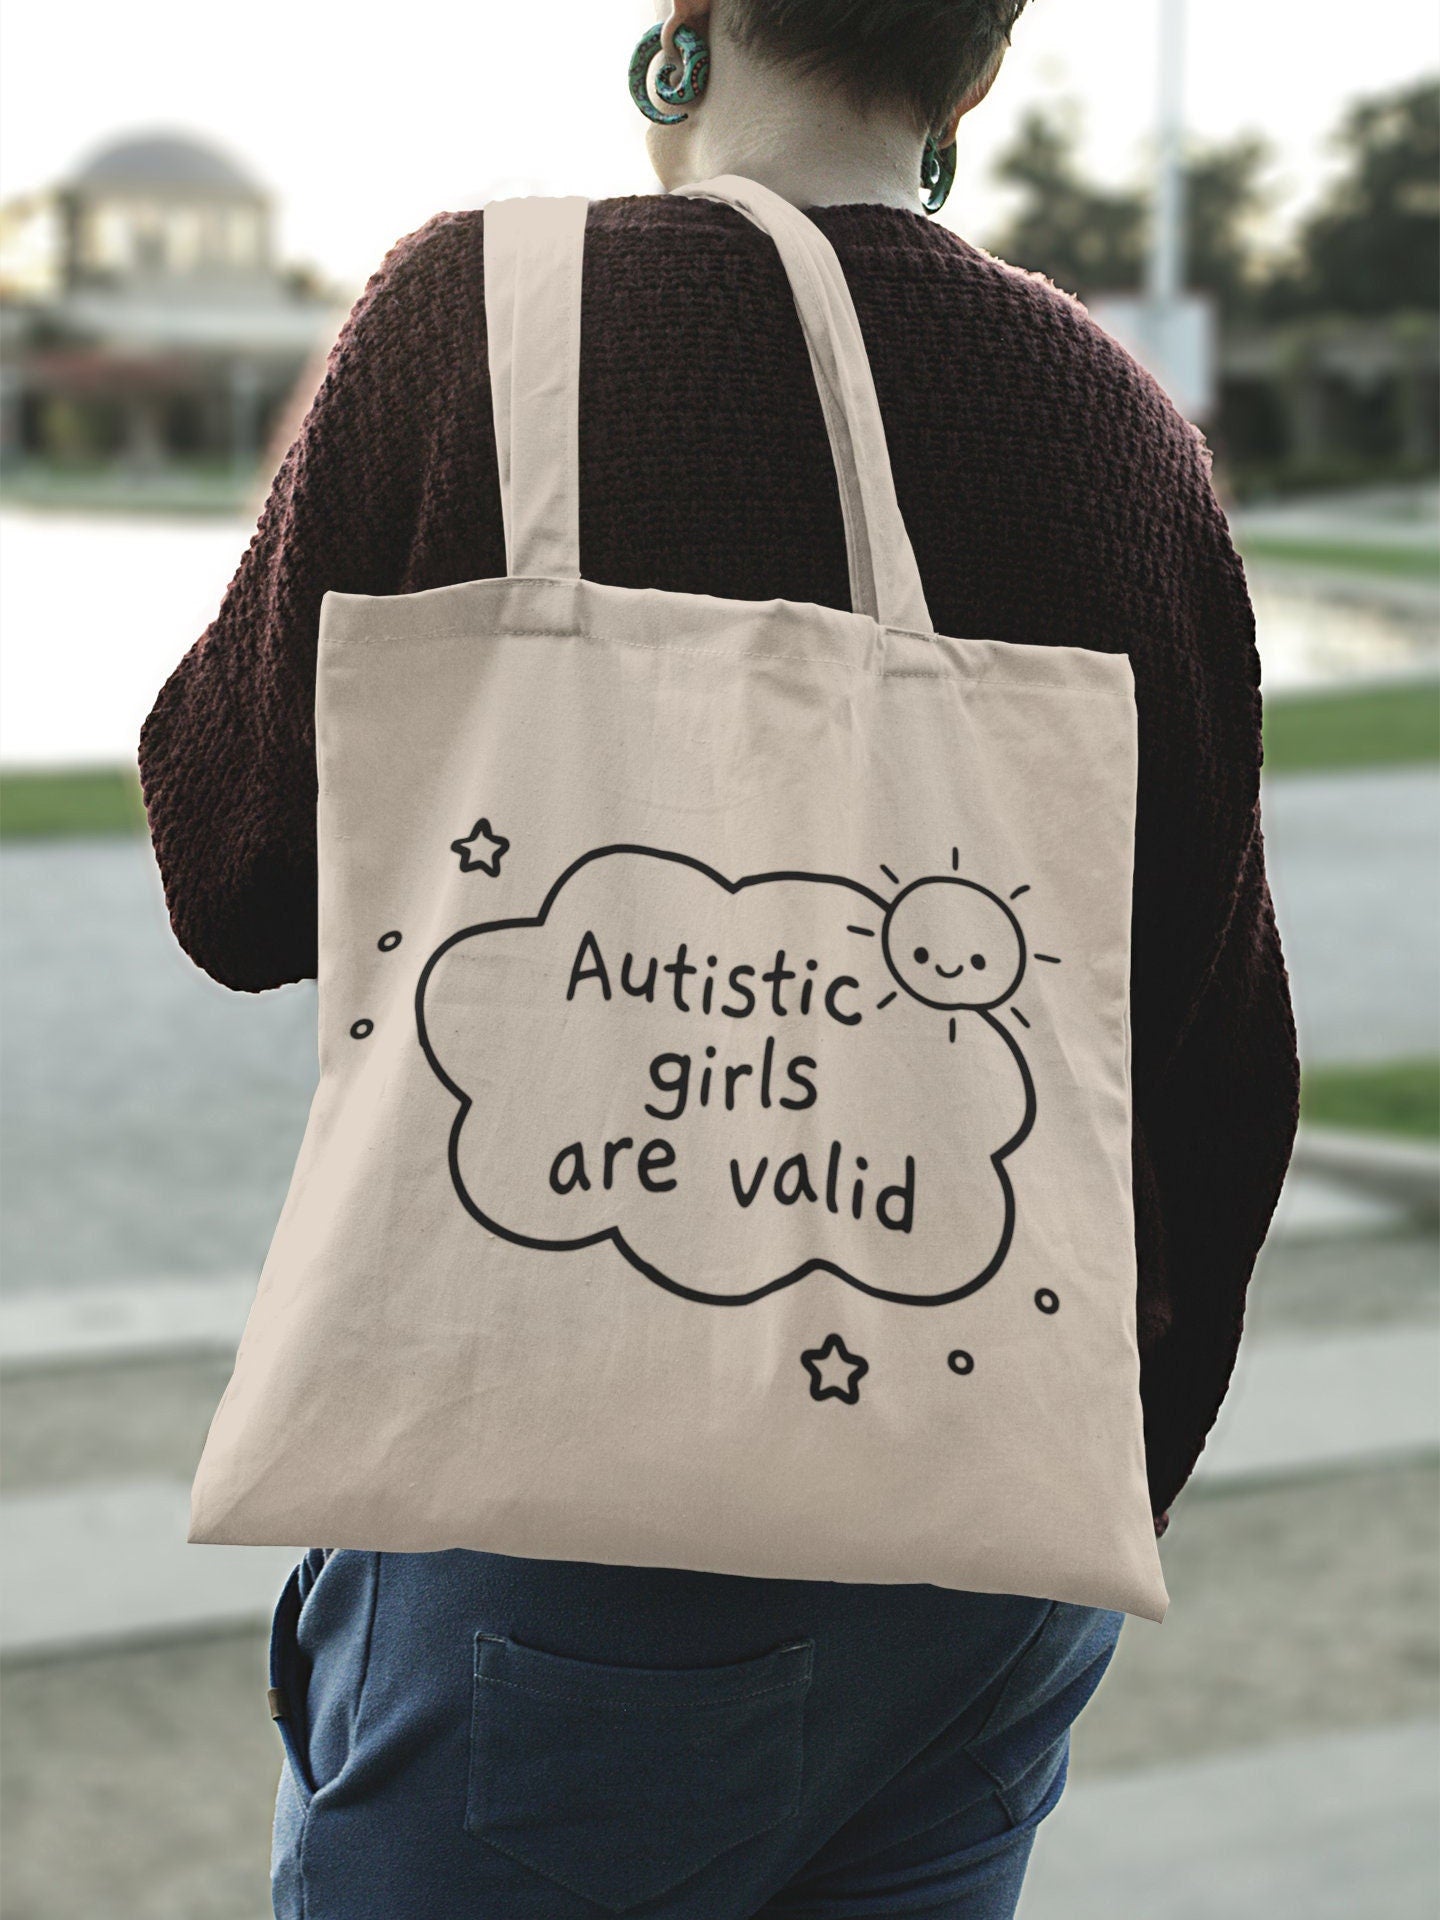 Autistic Girls Are Valid Tote Bag| Autism Gifts - Neurodiversity Bag - Awareness